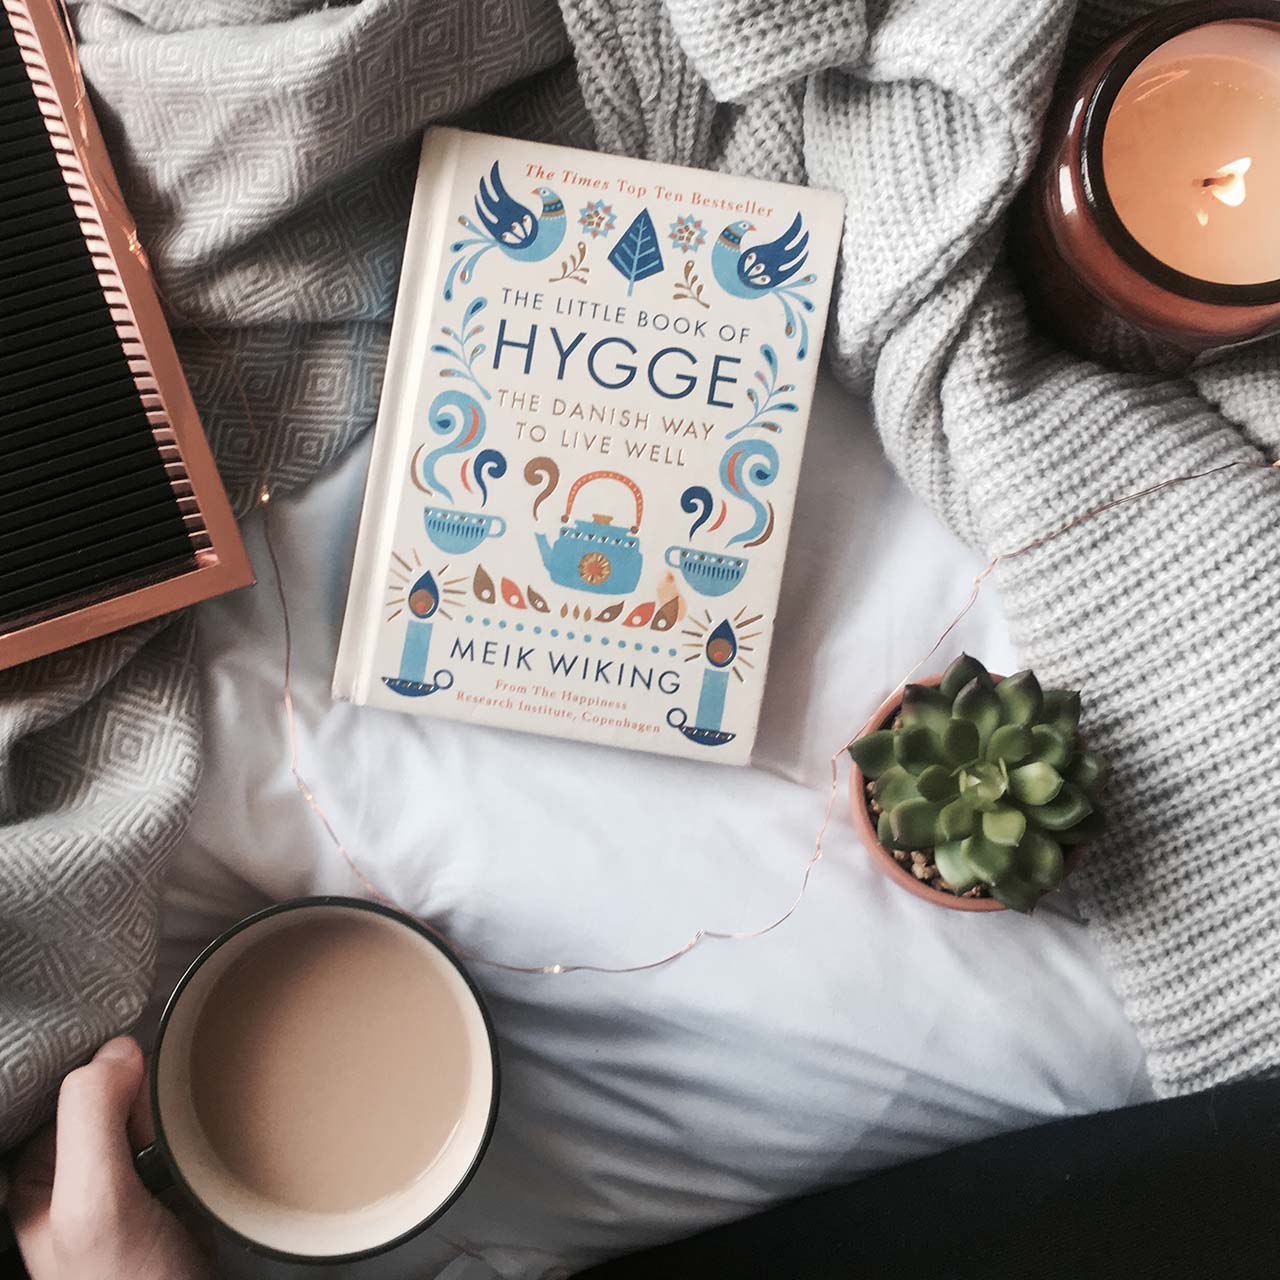 the little book of hygge by meik wiking on a bed surrounded by a cup of coffee, a burning candle and cosy blankets